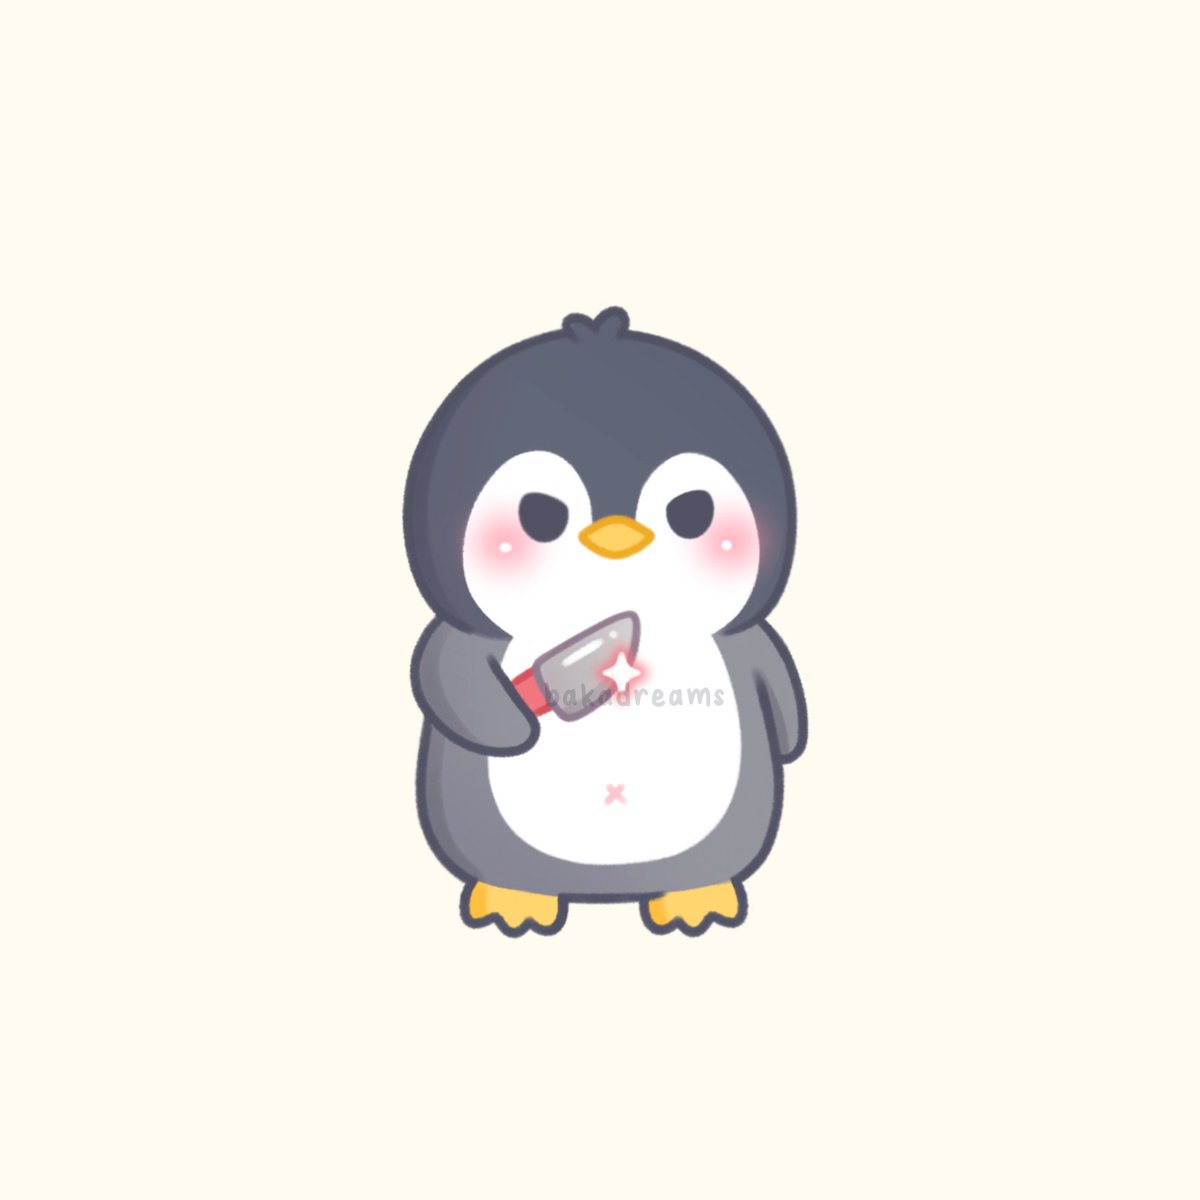 Waddle waddle waddle ☺️ -st*b- 🔪 Who says you can't be both cute AND dangerous? #penguin #penguinart #cutepenguin #cuteart #digitalart #penguinlover #penguinlove #cuteanimalart #cuteanddangerous #penguindrawing #kawaii